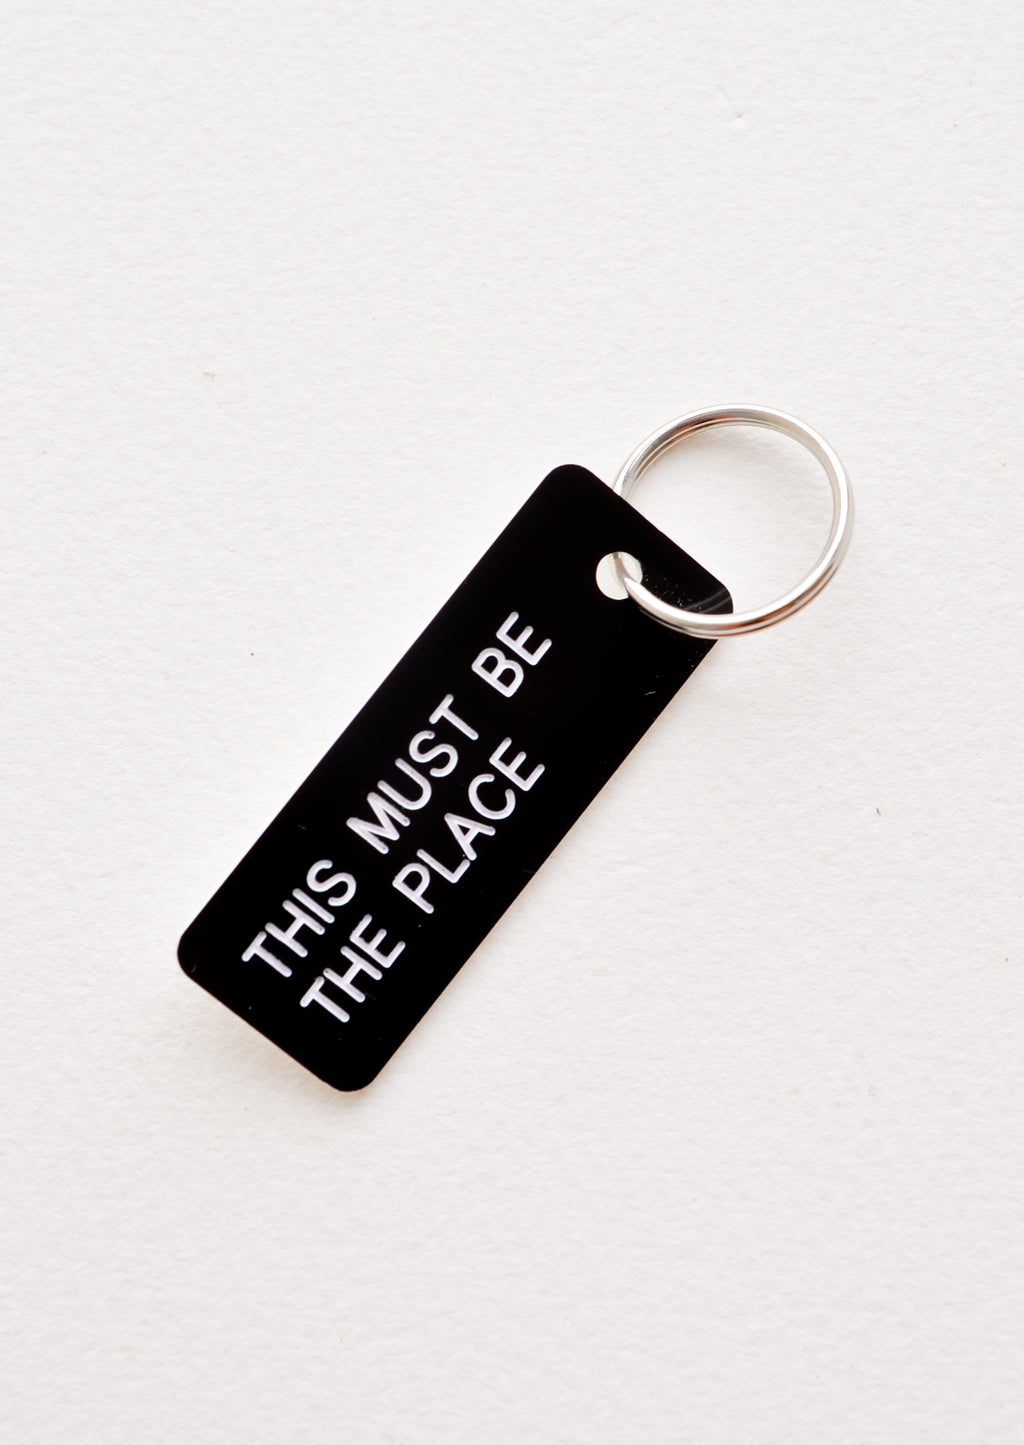 This Must Be The Place: Small acrylic keychain, black background with white words that says "THIS MUST BE THE PLACE"